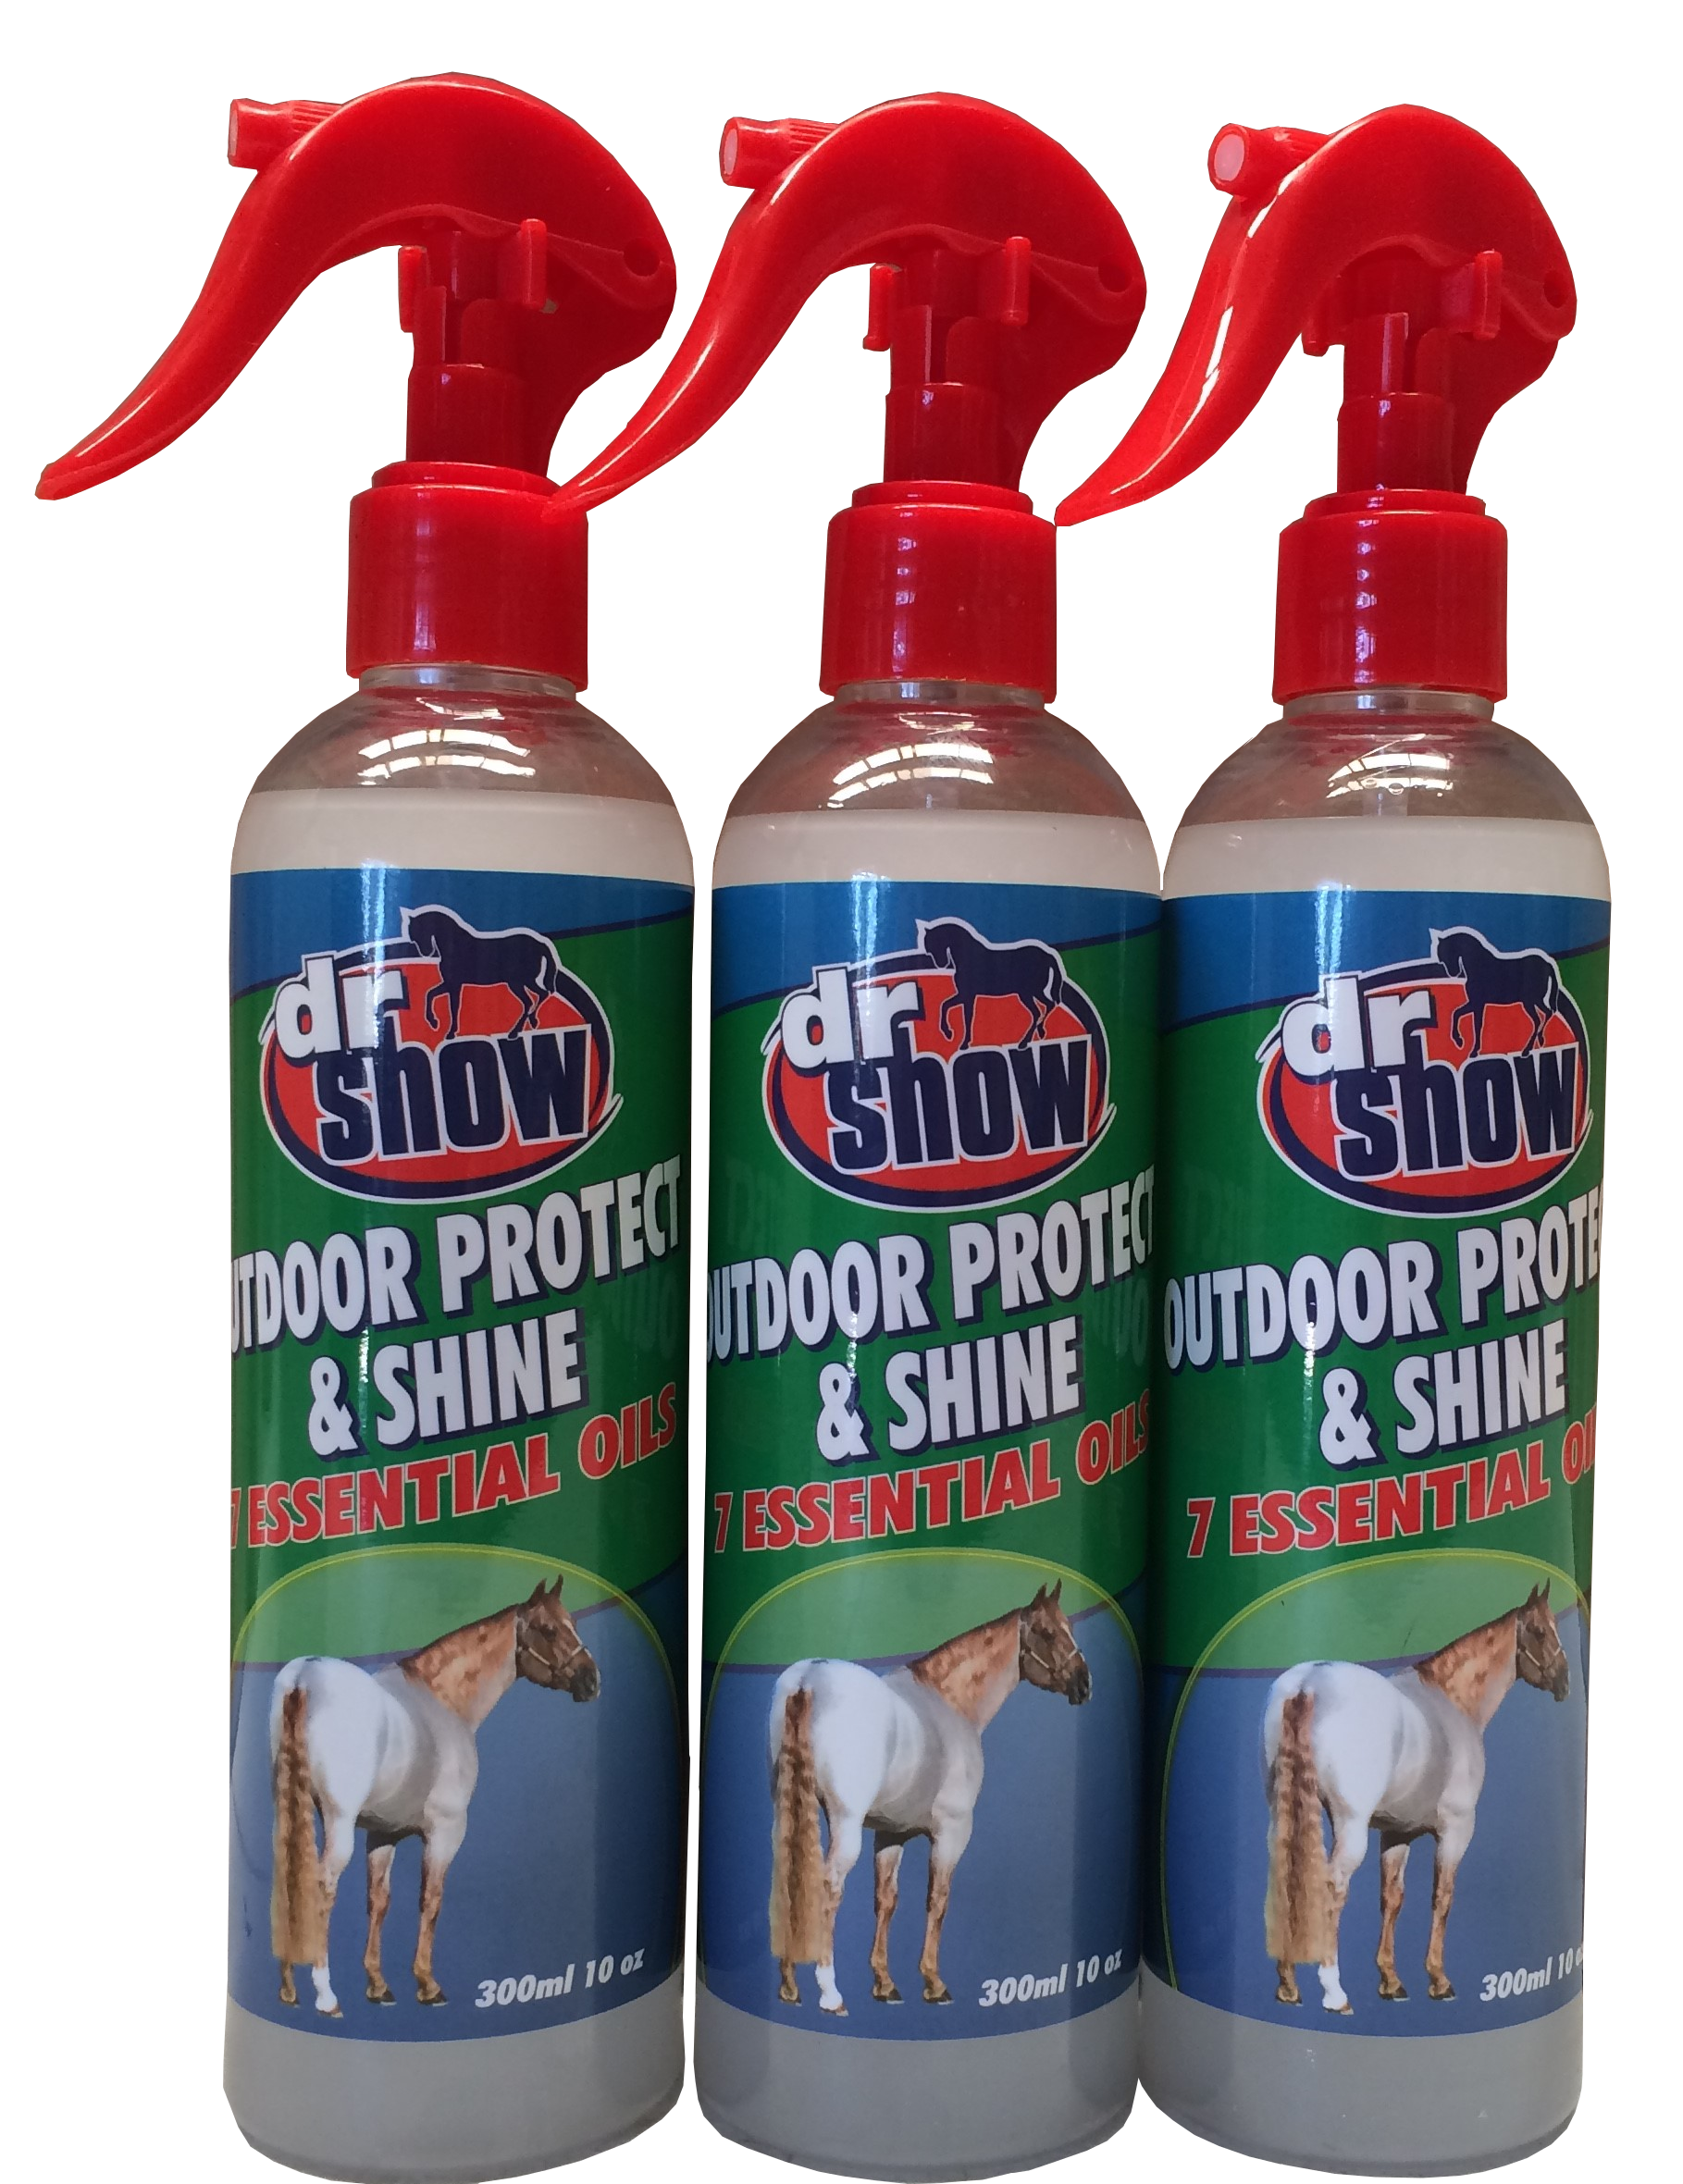 Dr Show Outdoor Protect N Shine